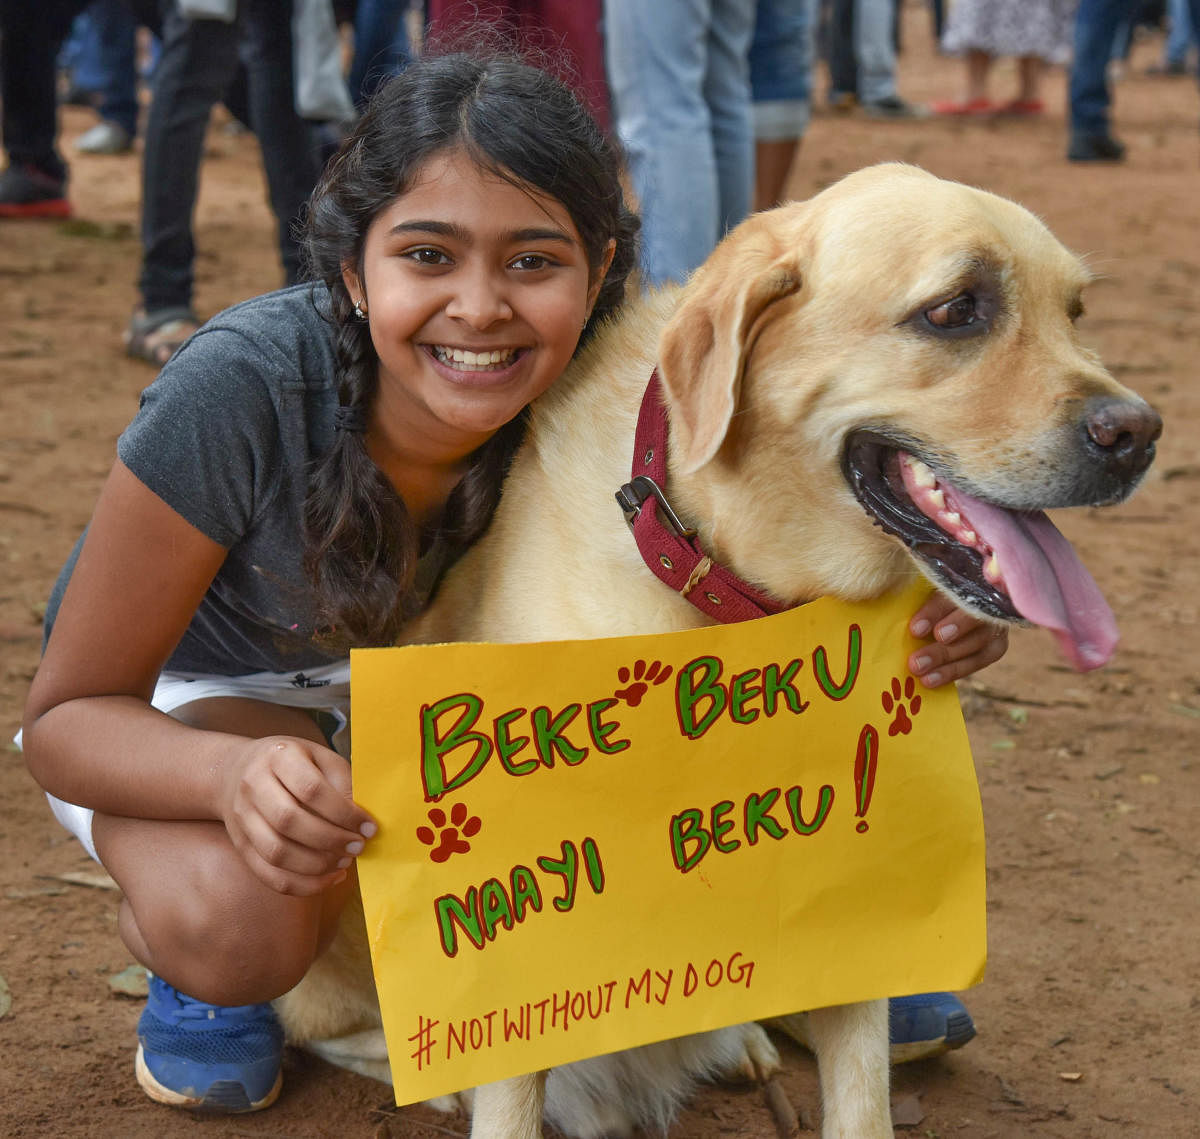 Our dogs aren’t your business, BBMP